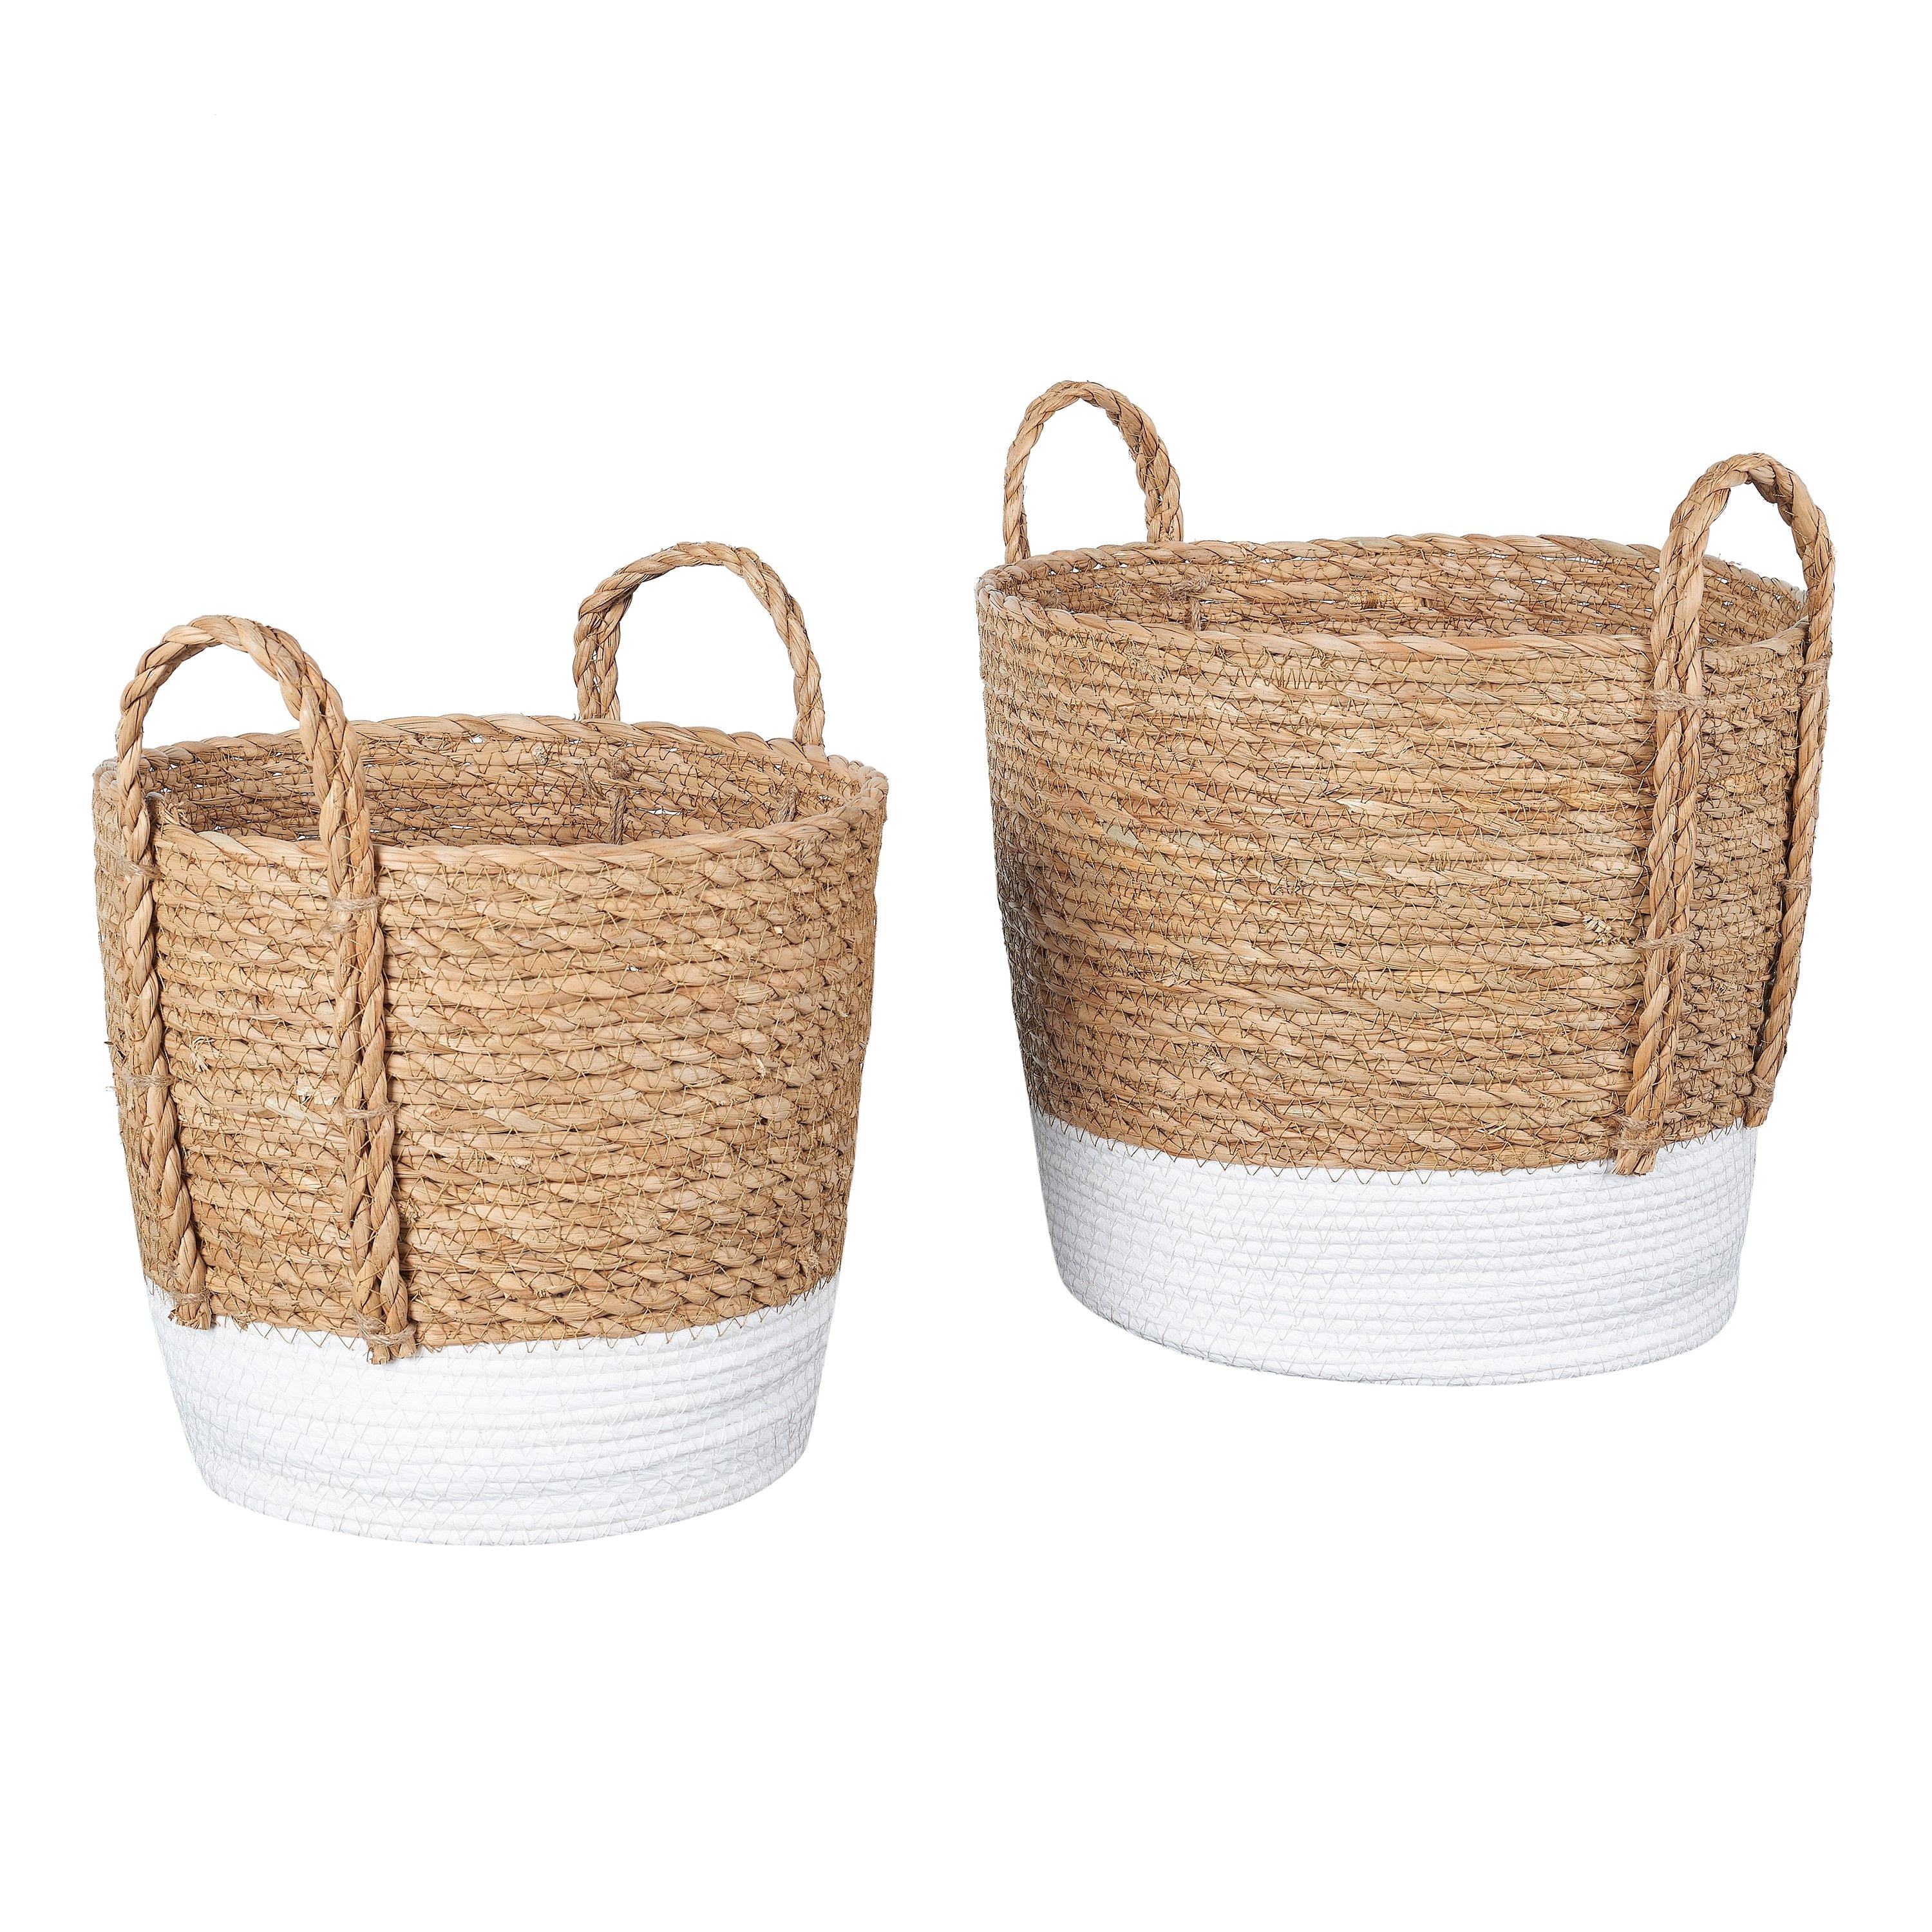 The Sweet Grace Set — The Basketry